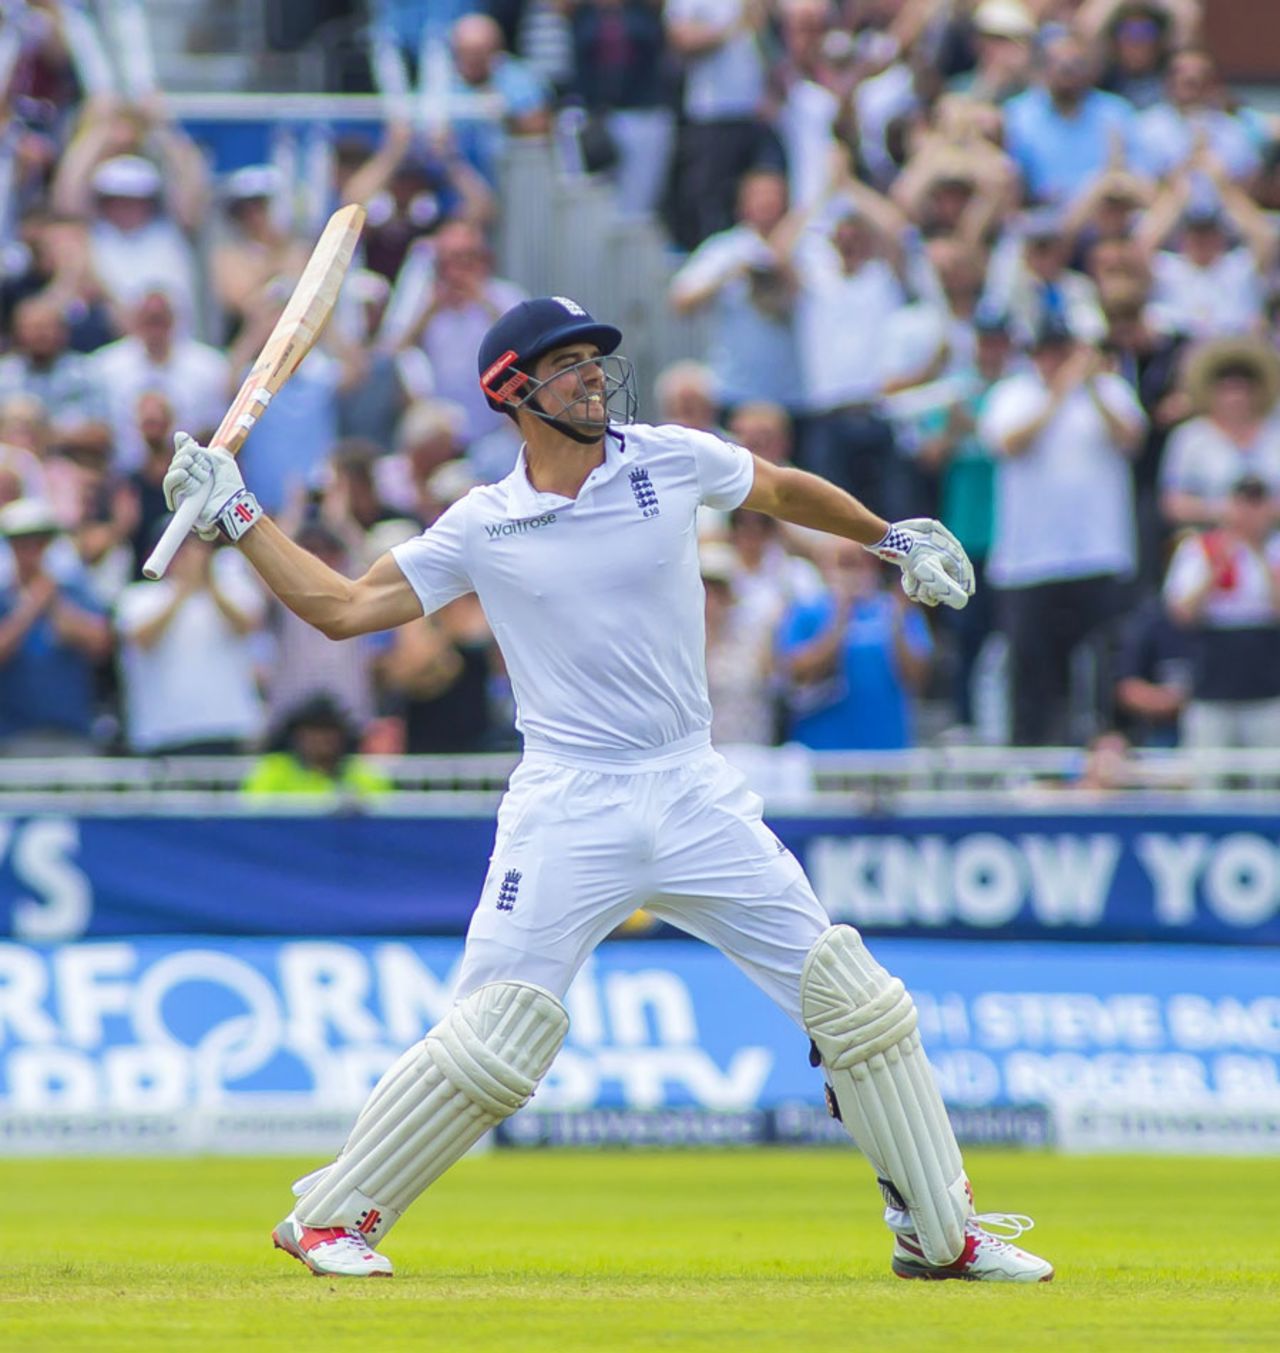 Alastair Cook celebrates his 29th Test hundred, England v Pakistan, 2nd Investec Test, Old Trafford, 1st day, July 22, 2016